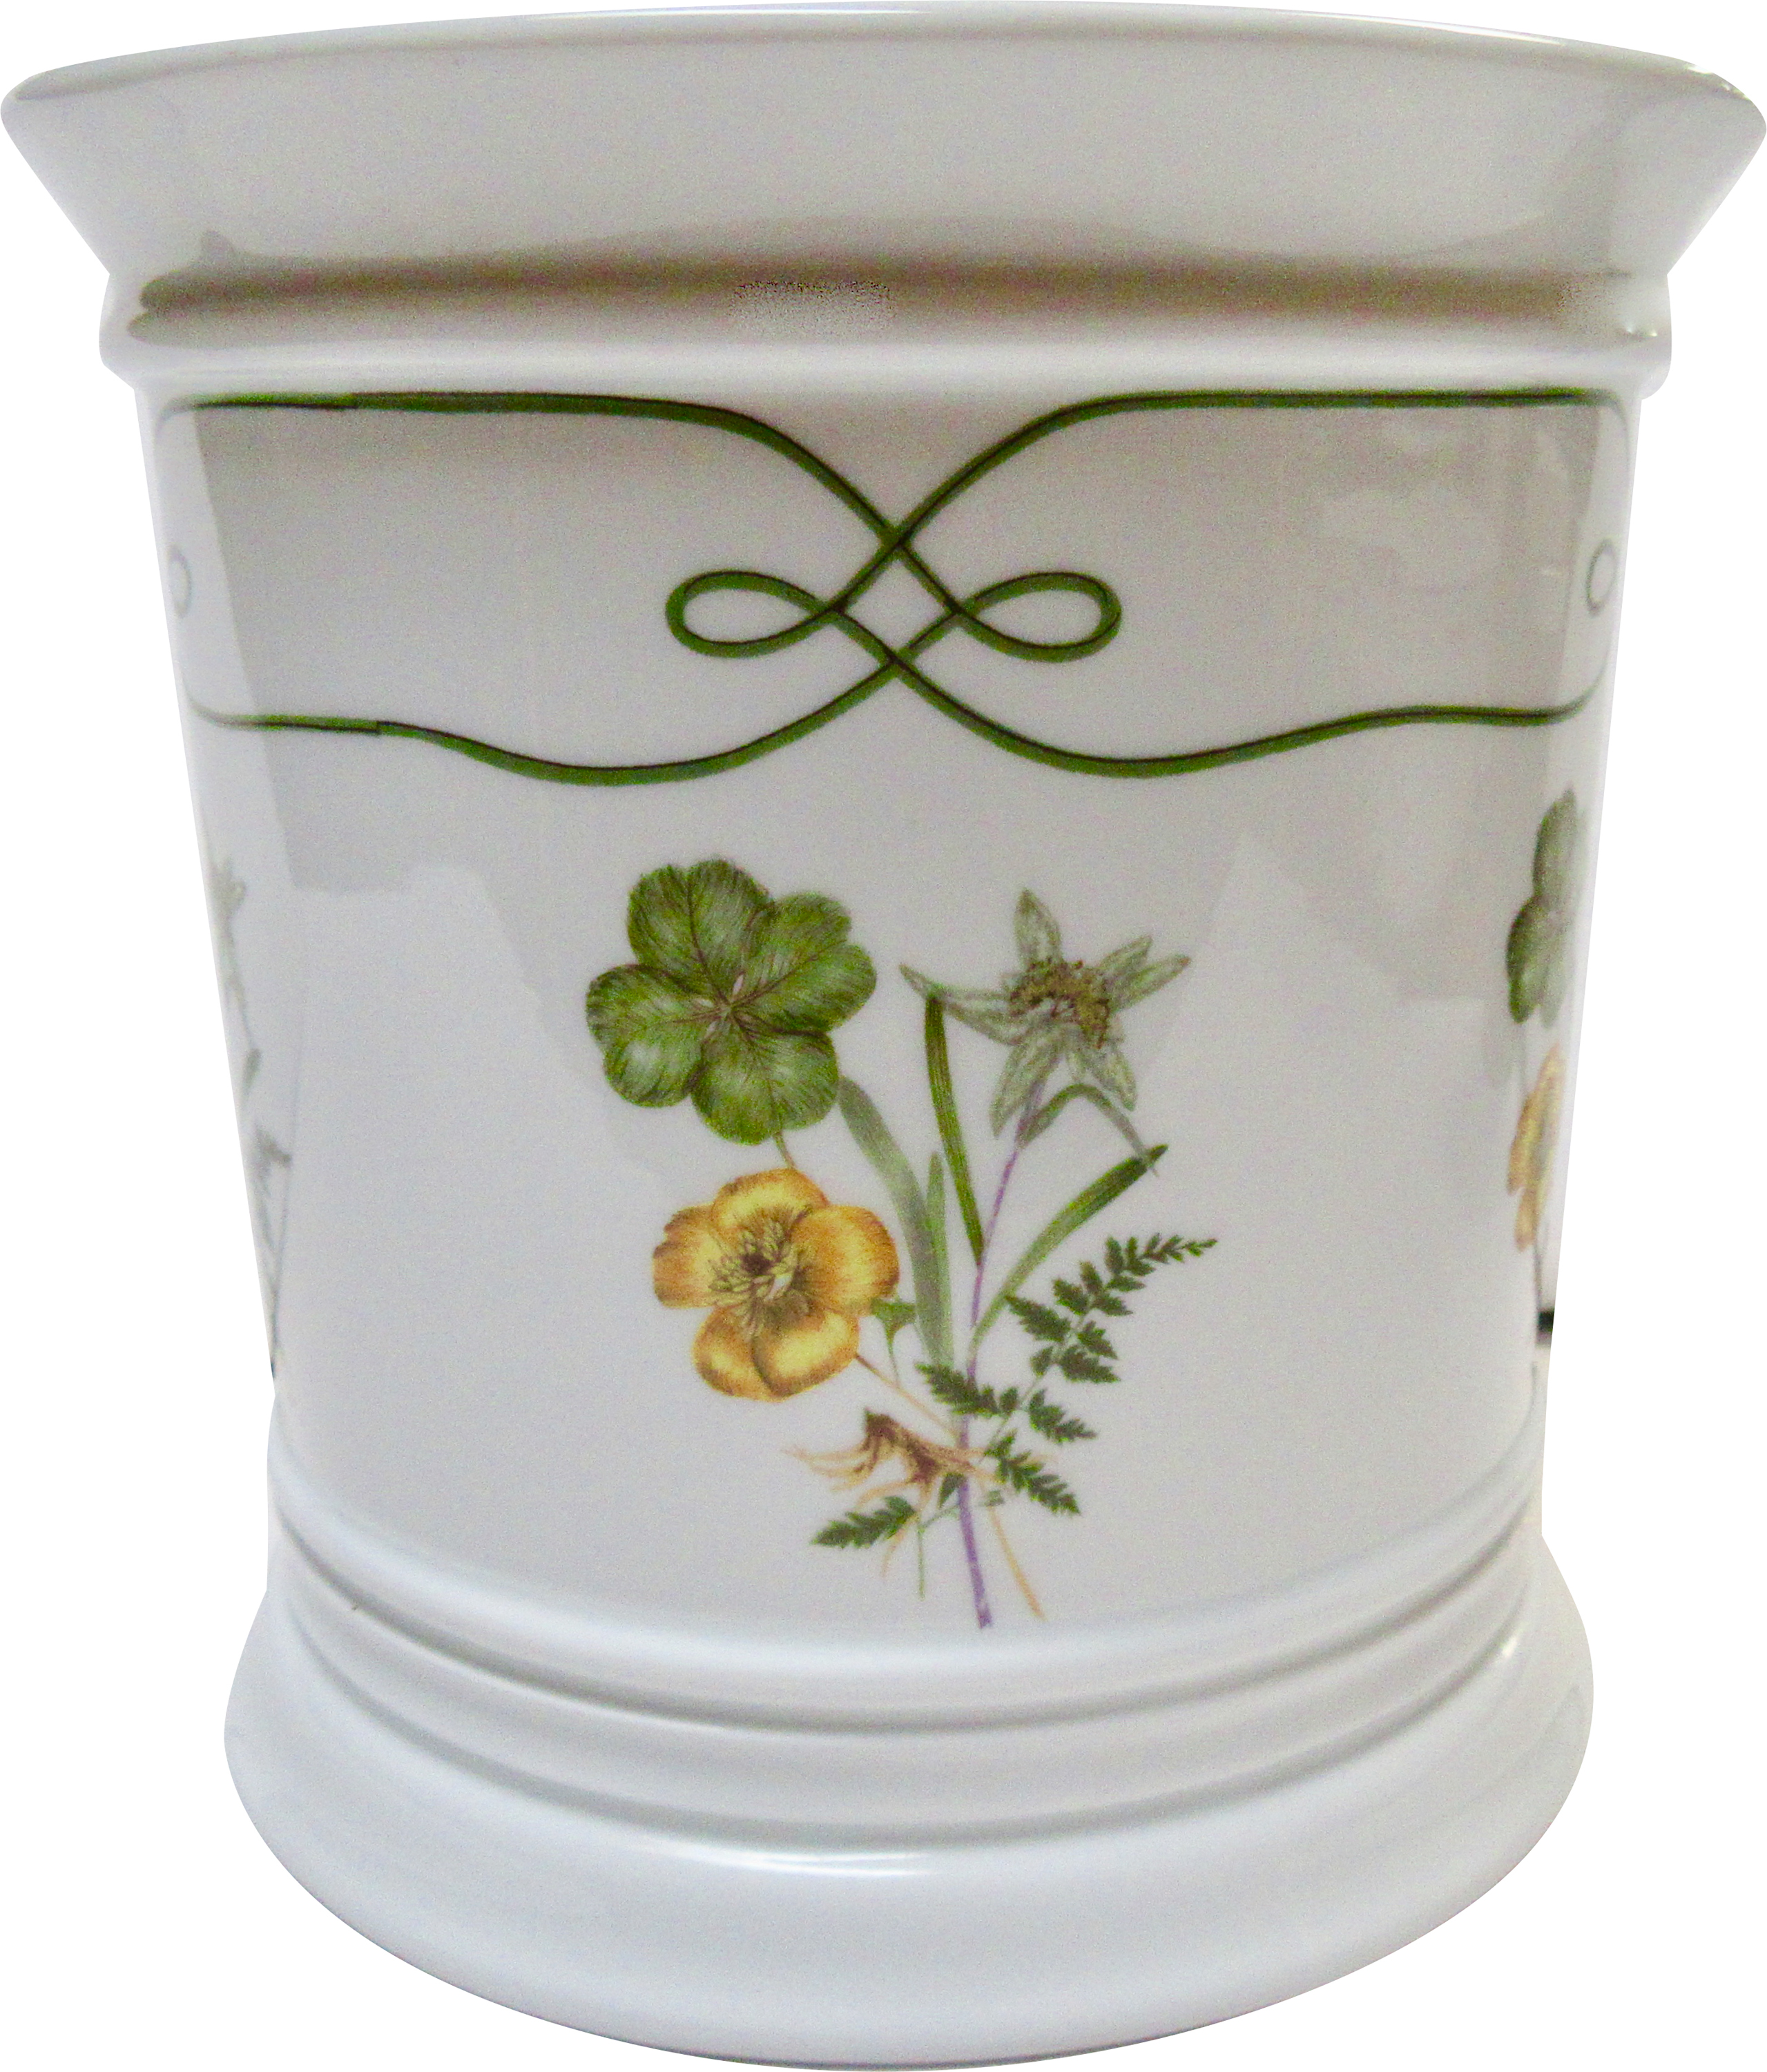 Raynaud Limoges Porcelain Cachepot